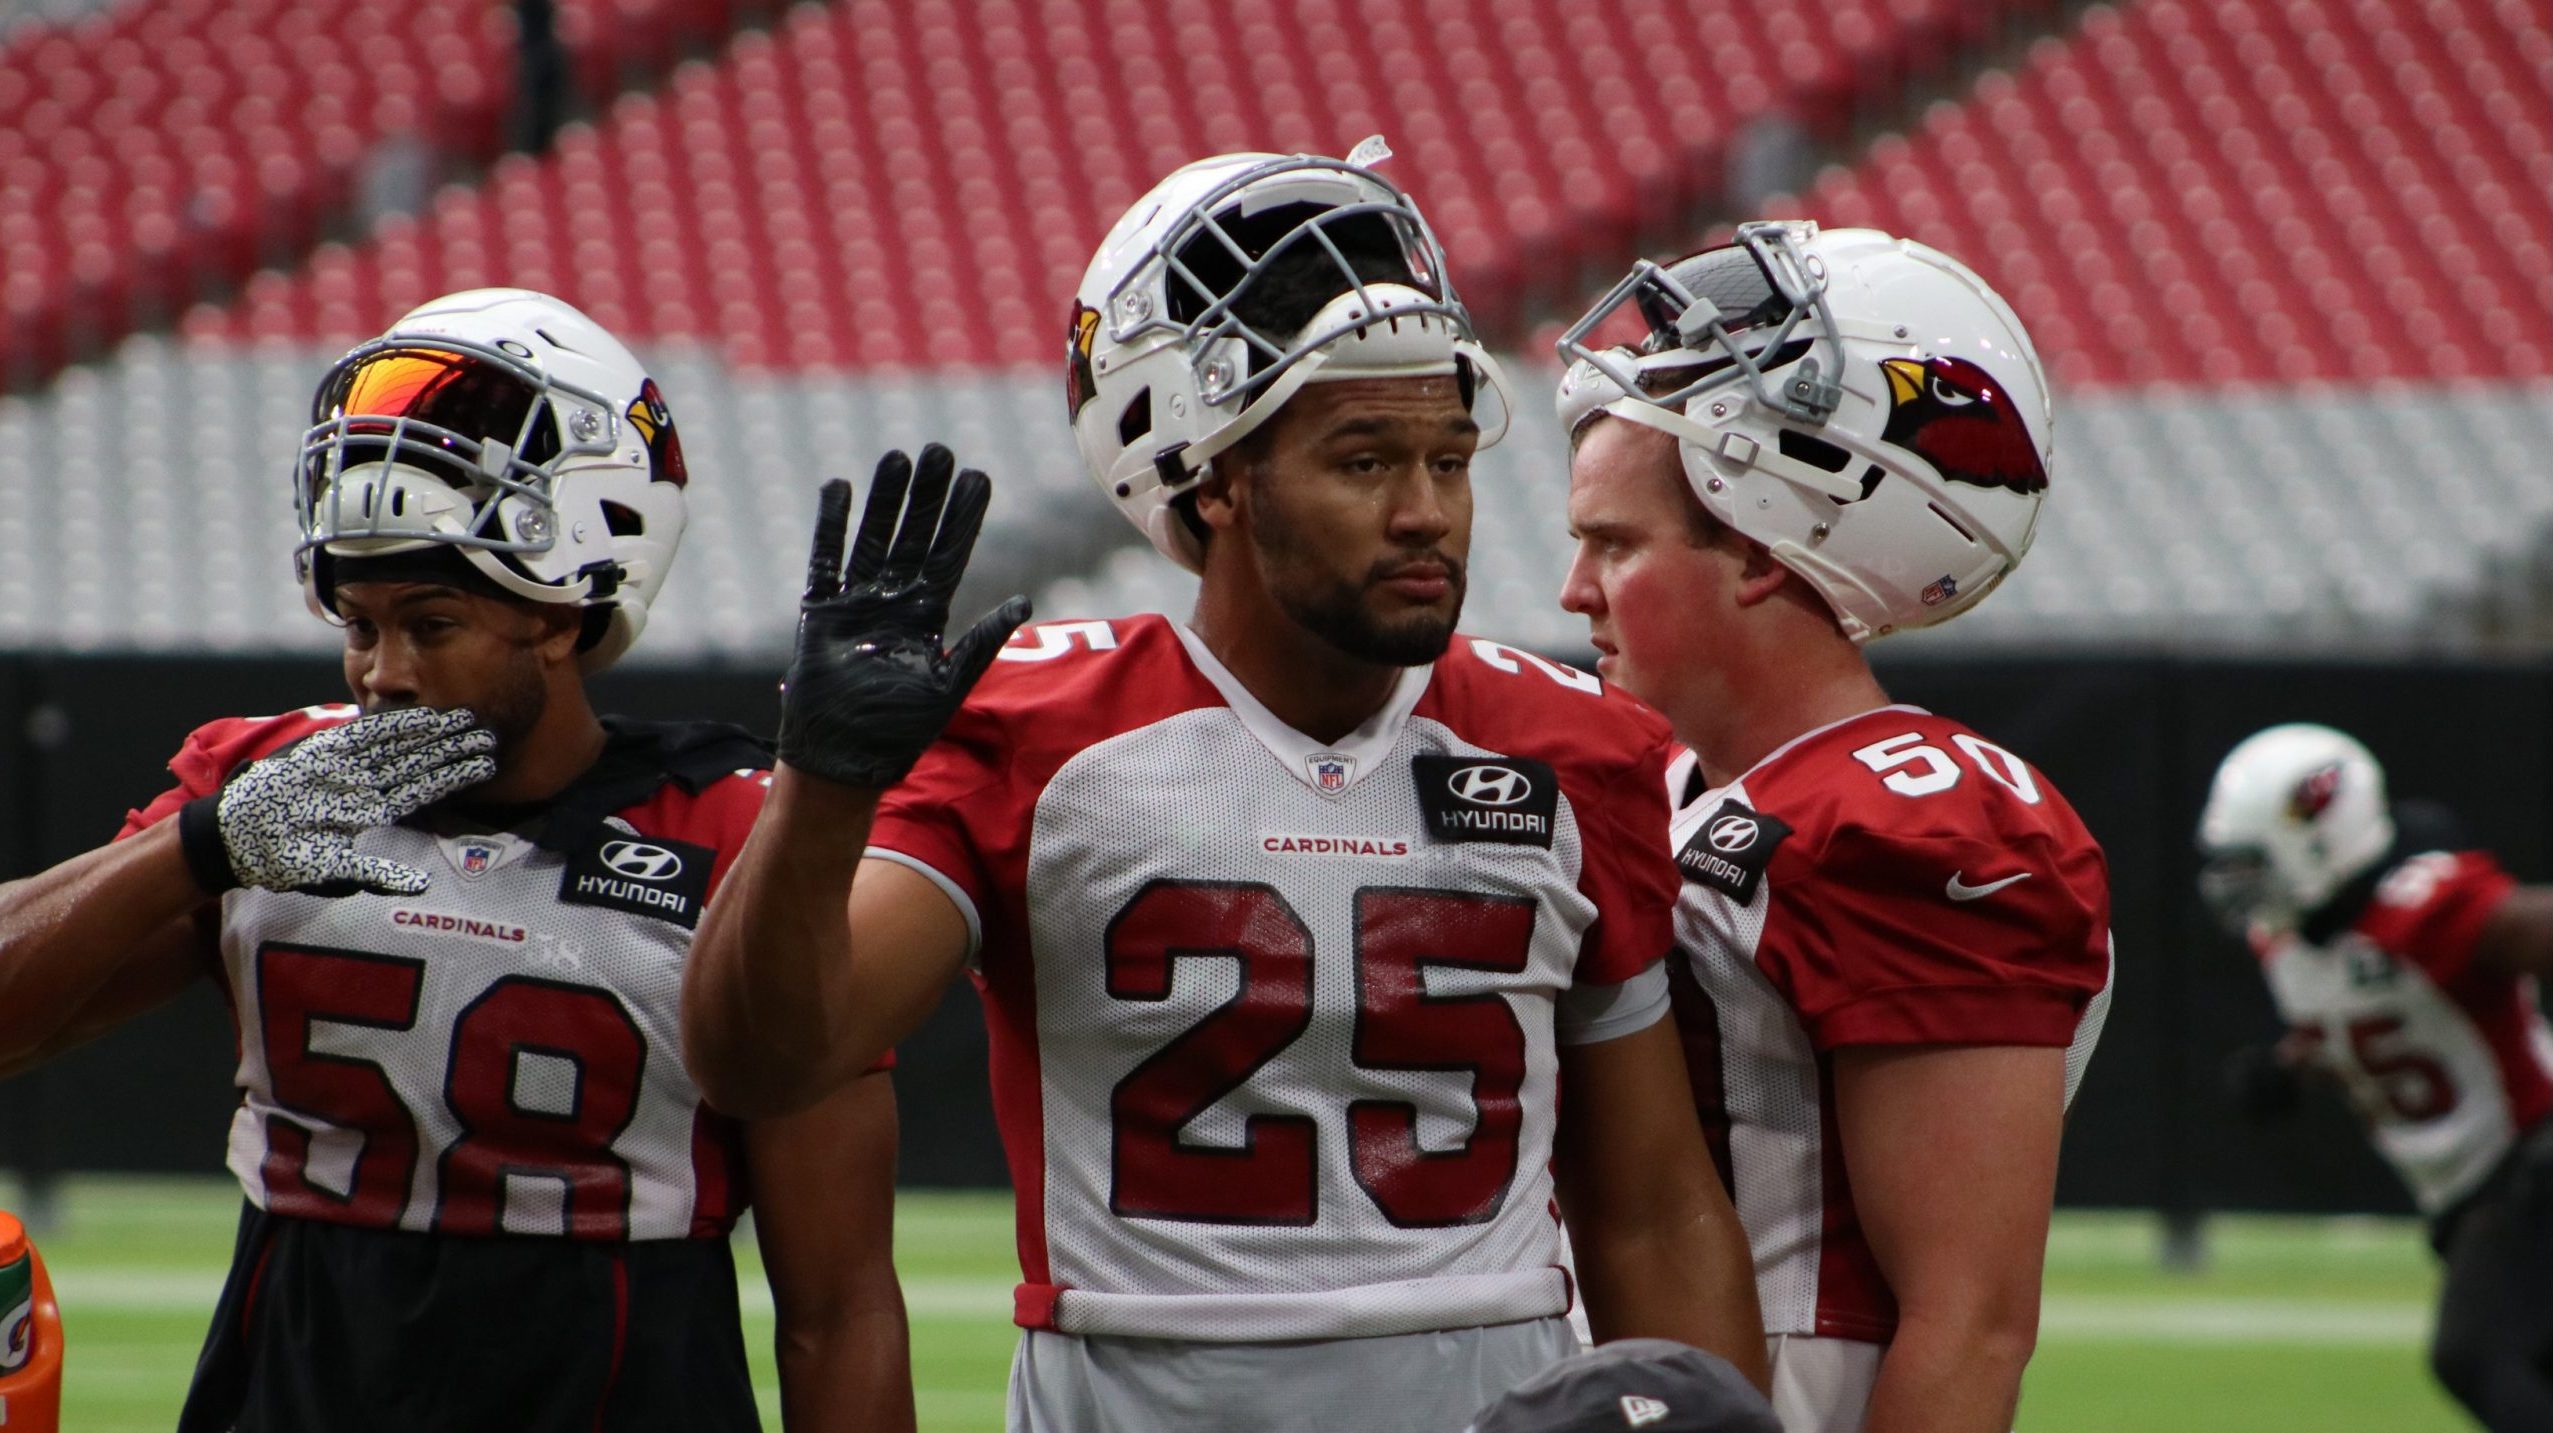 Cardinals rookie LB Zaven Collins waves to the crowd during training camp on Sunday, Aug. 15, in Gl...